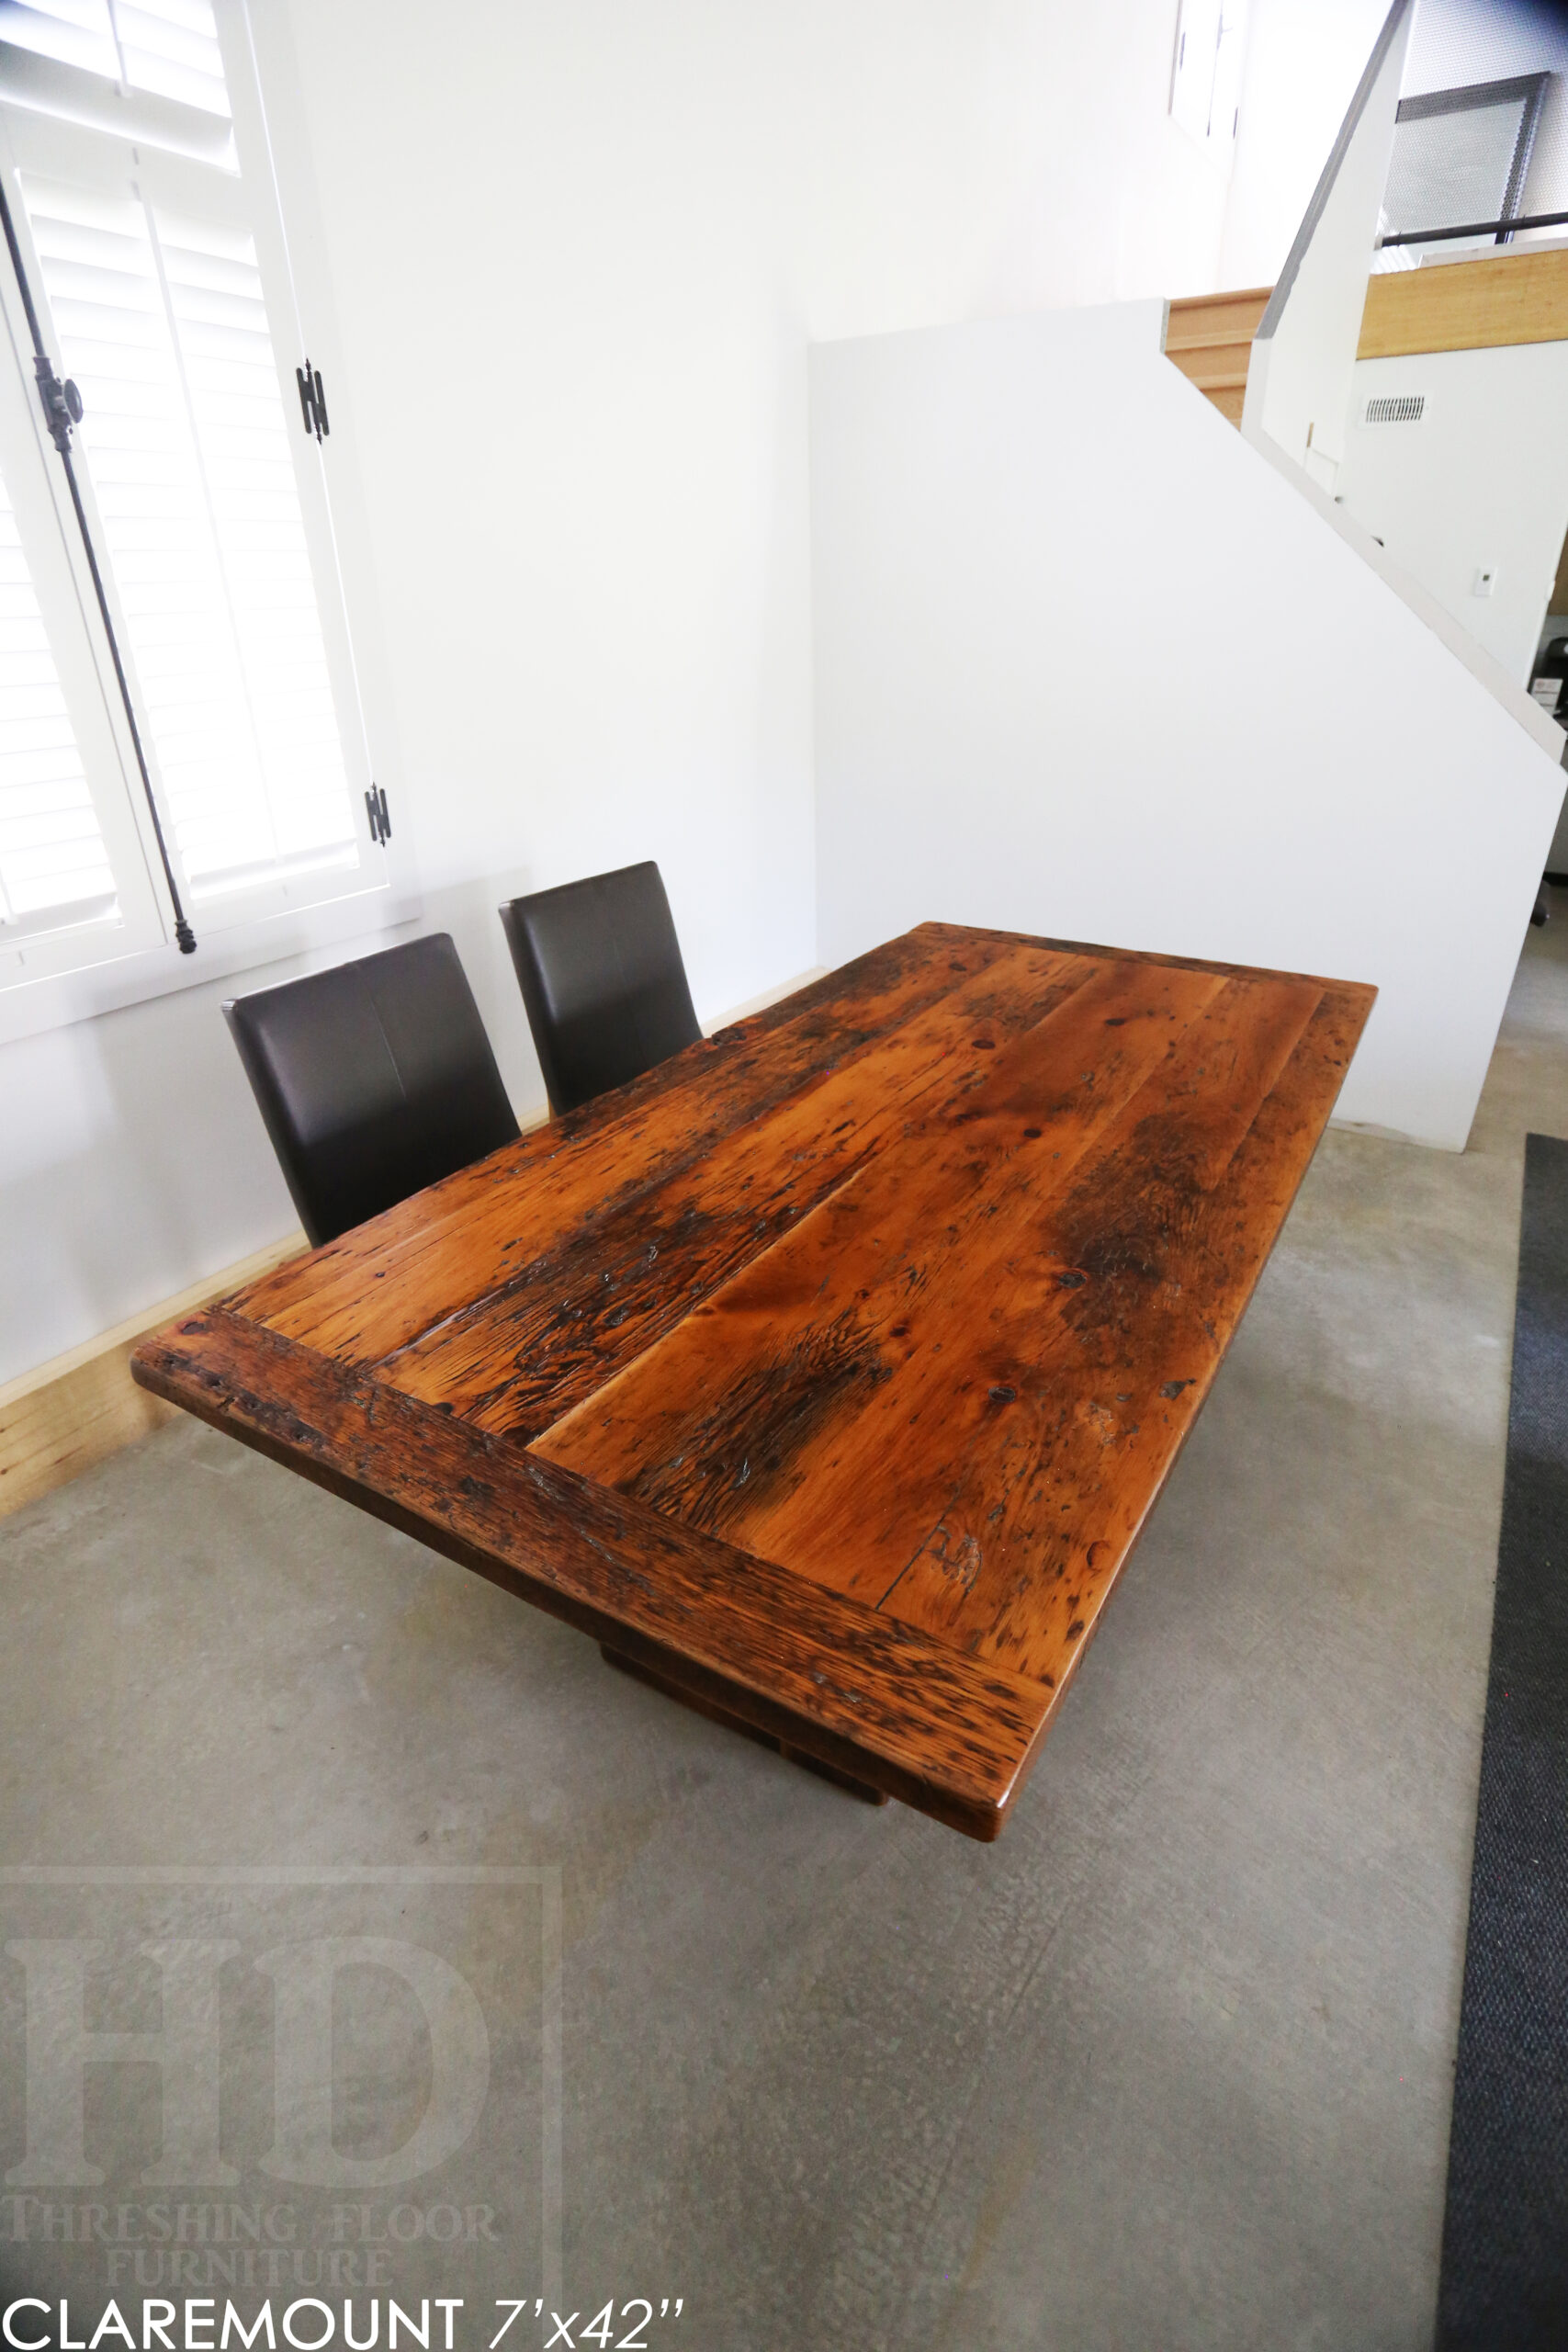 7' Reclaimed Wood Table for Claremount, ON home - 42" wide - Modern plank base - Old Growth Pine Barnwood Construction - Original edges & distressing maintained - Satin polyurethane finish [no epoxy filling] / www.table.ca